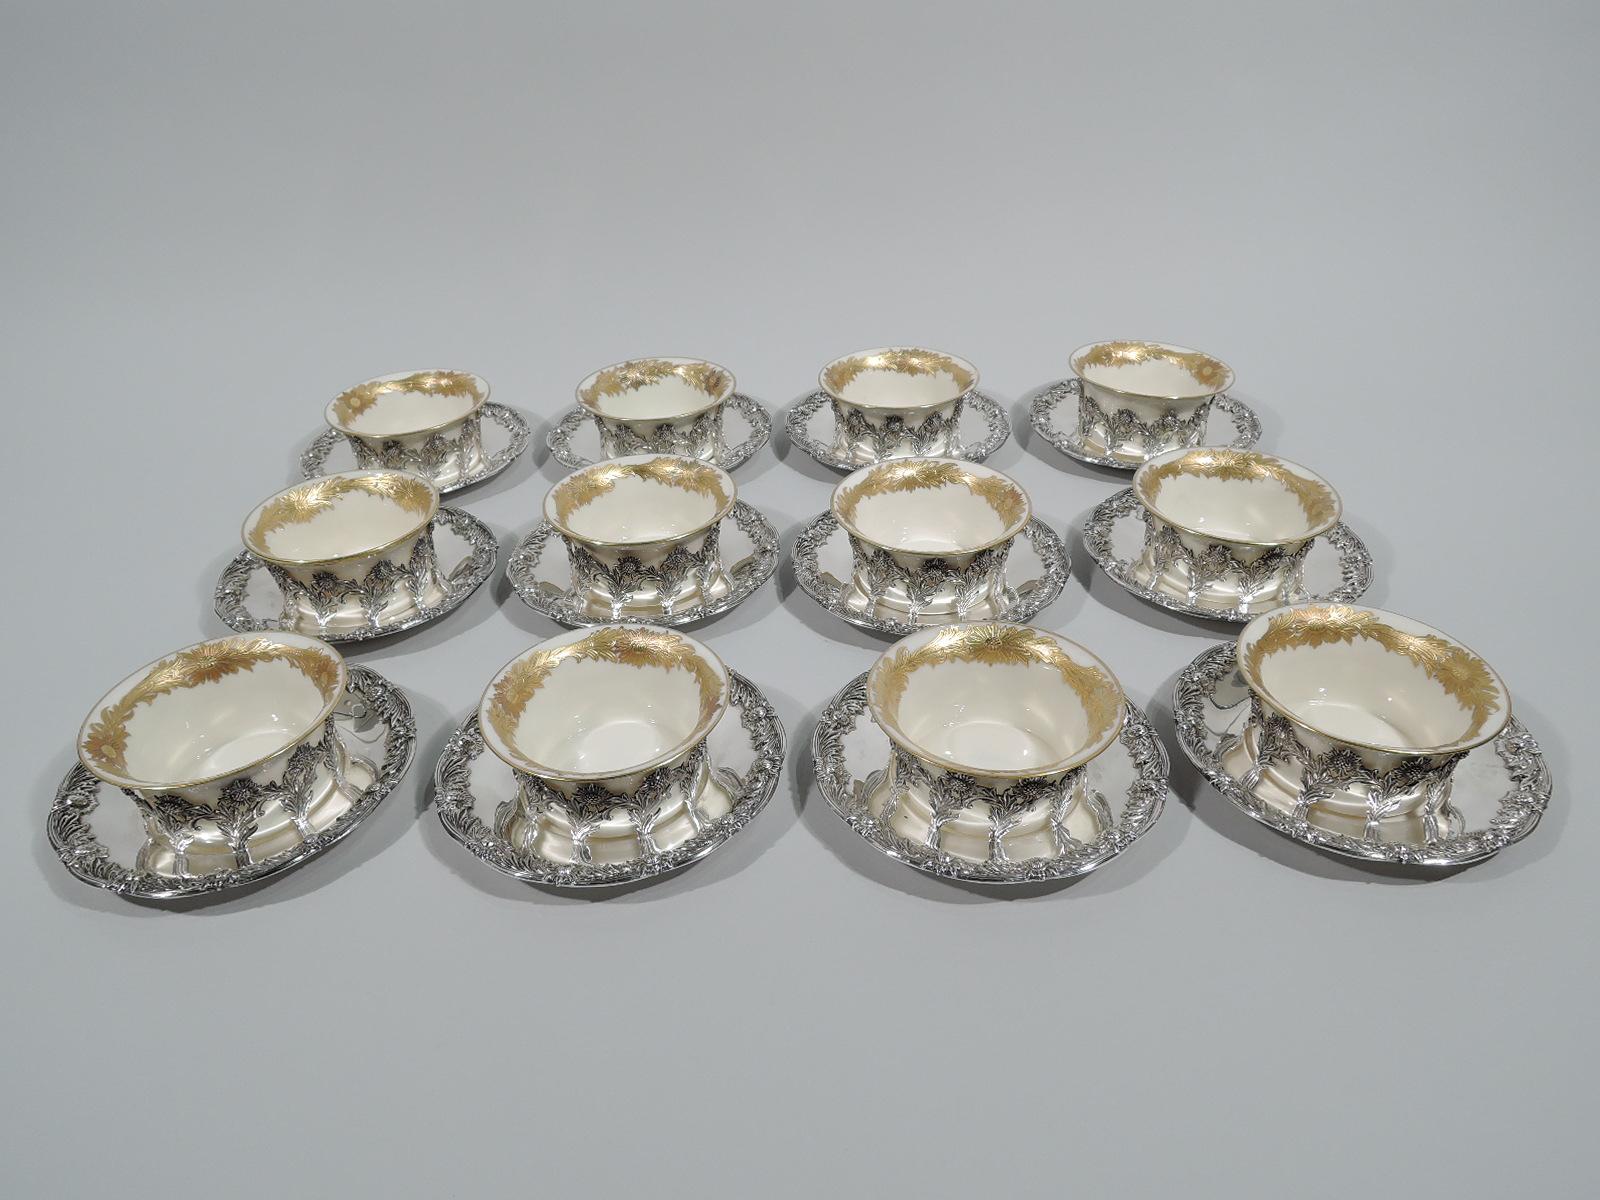 Set of 12 Chrysanthemum sterling silver bouillon bowl holders: Each: Open ring comprising joined stem flowers mounted to underplate with classic rim border comprising alternating flower heads and shaggy leaves. Fully marked including pattern no.